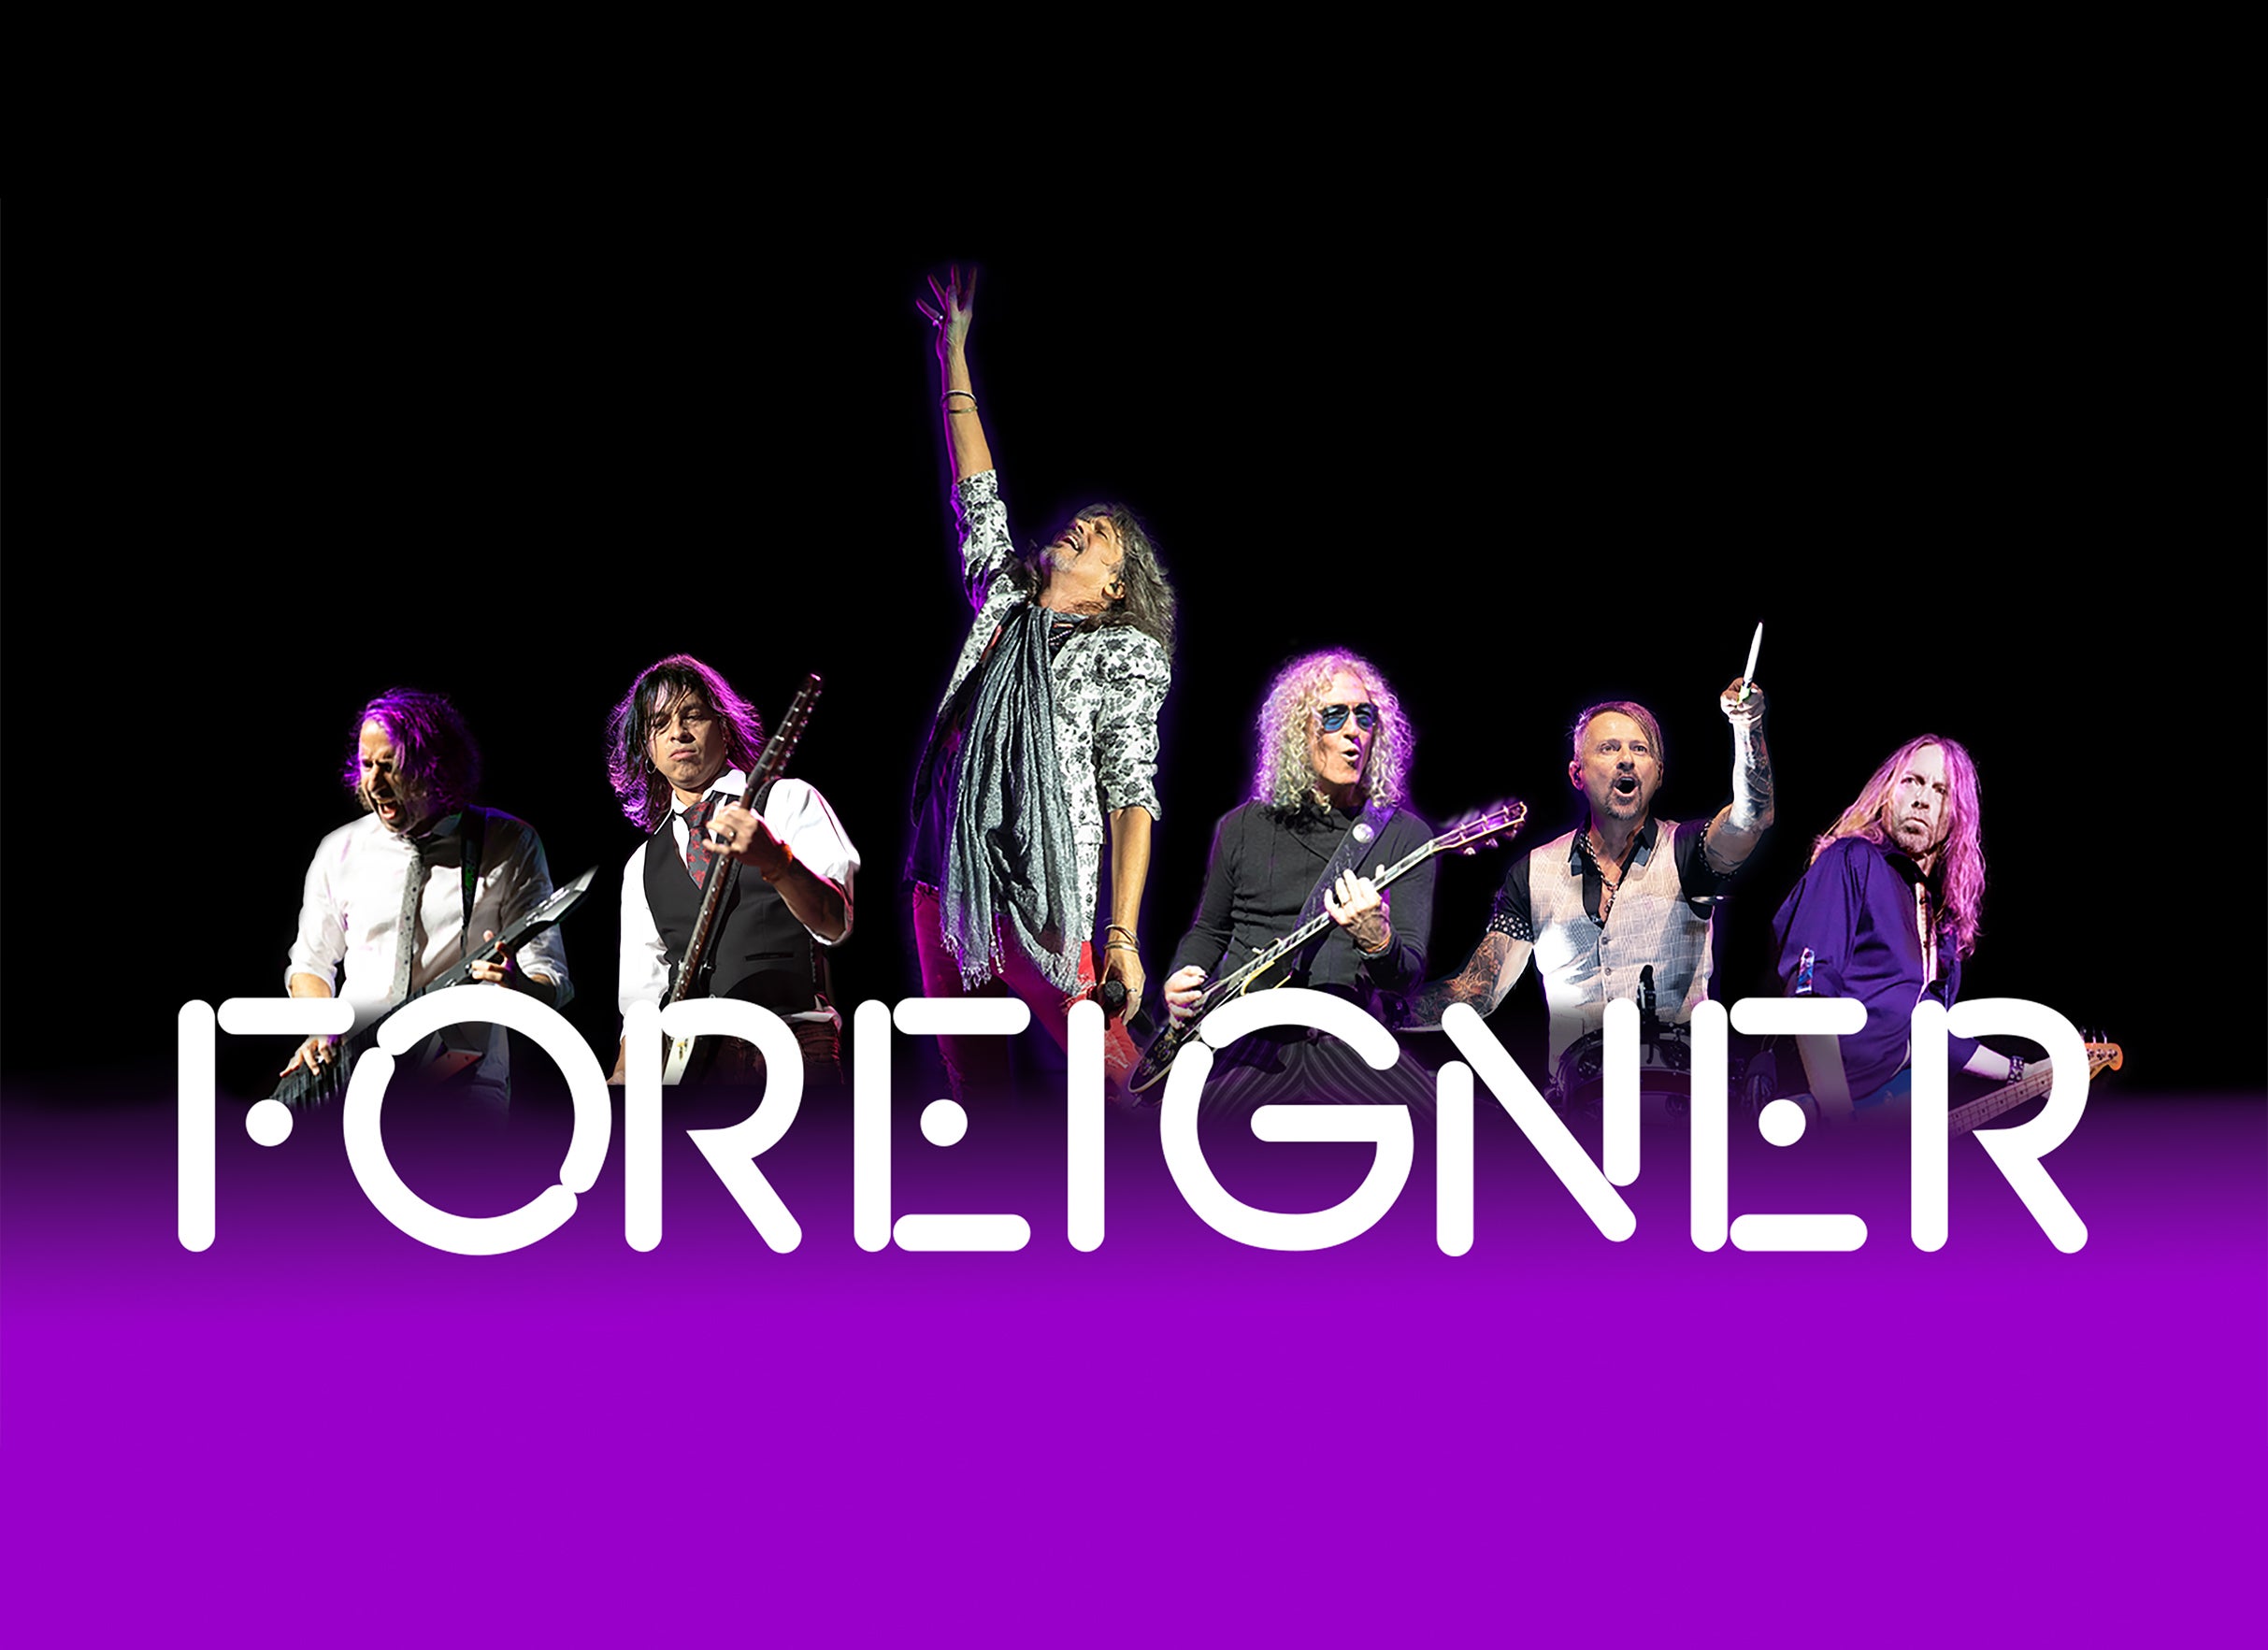 Foreigner: Feels Like the Last Time Farewell Tour presale passwords